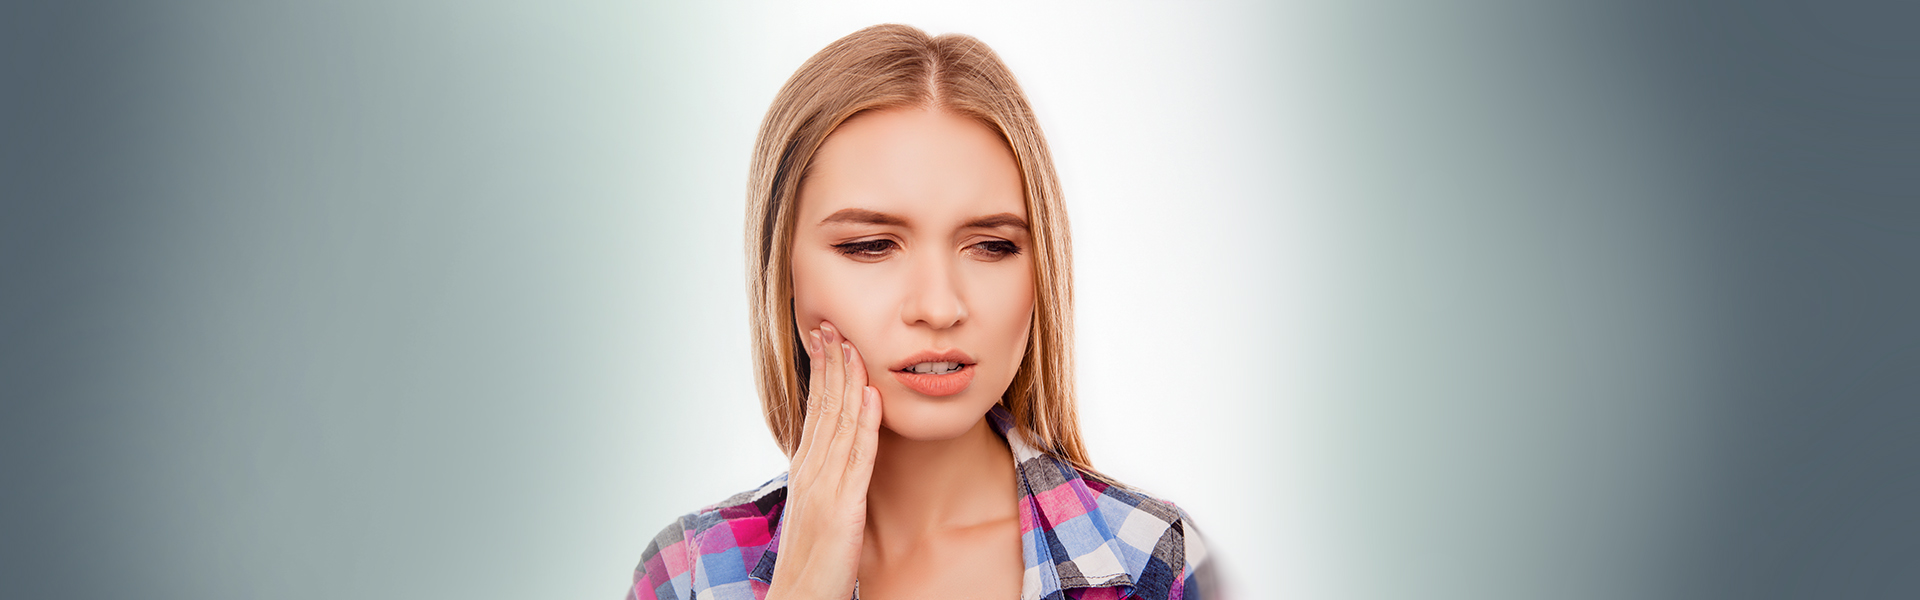 What Should I Do if I Have a Toothache?